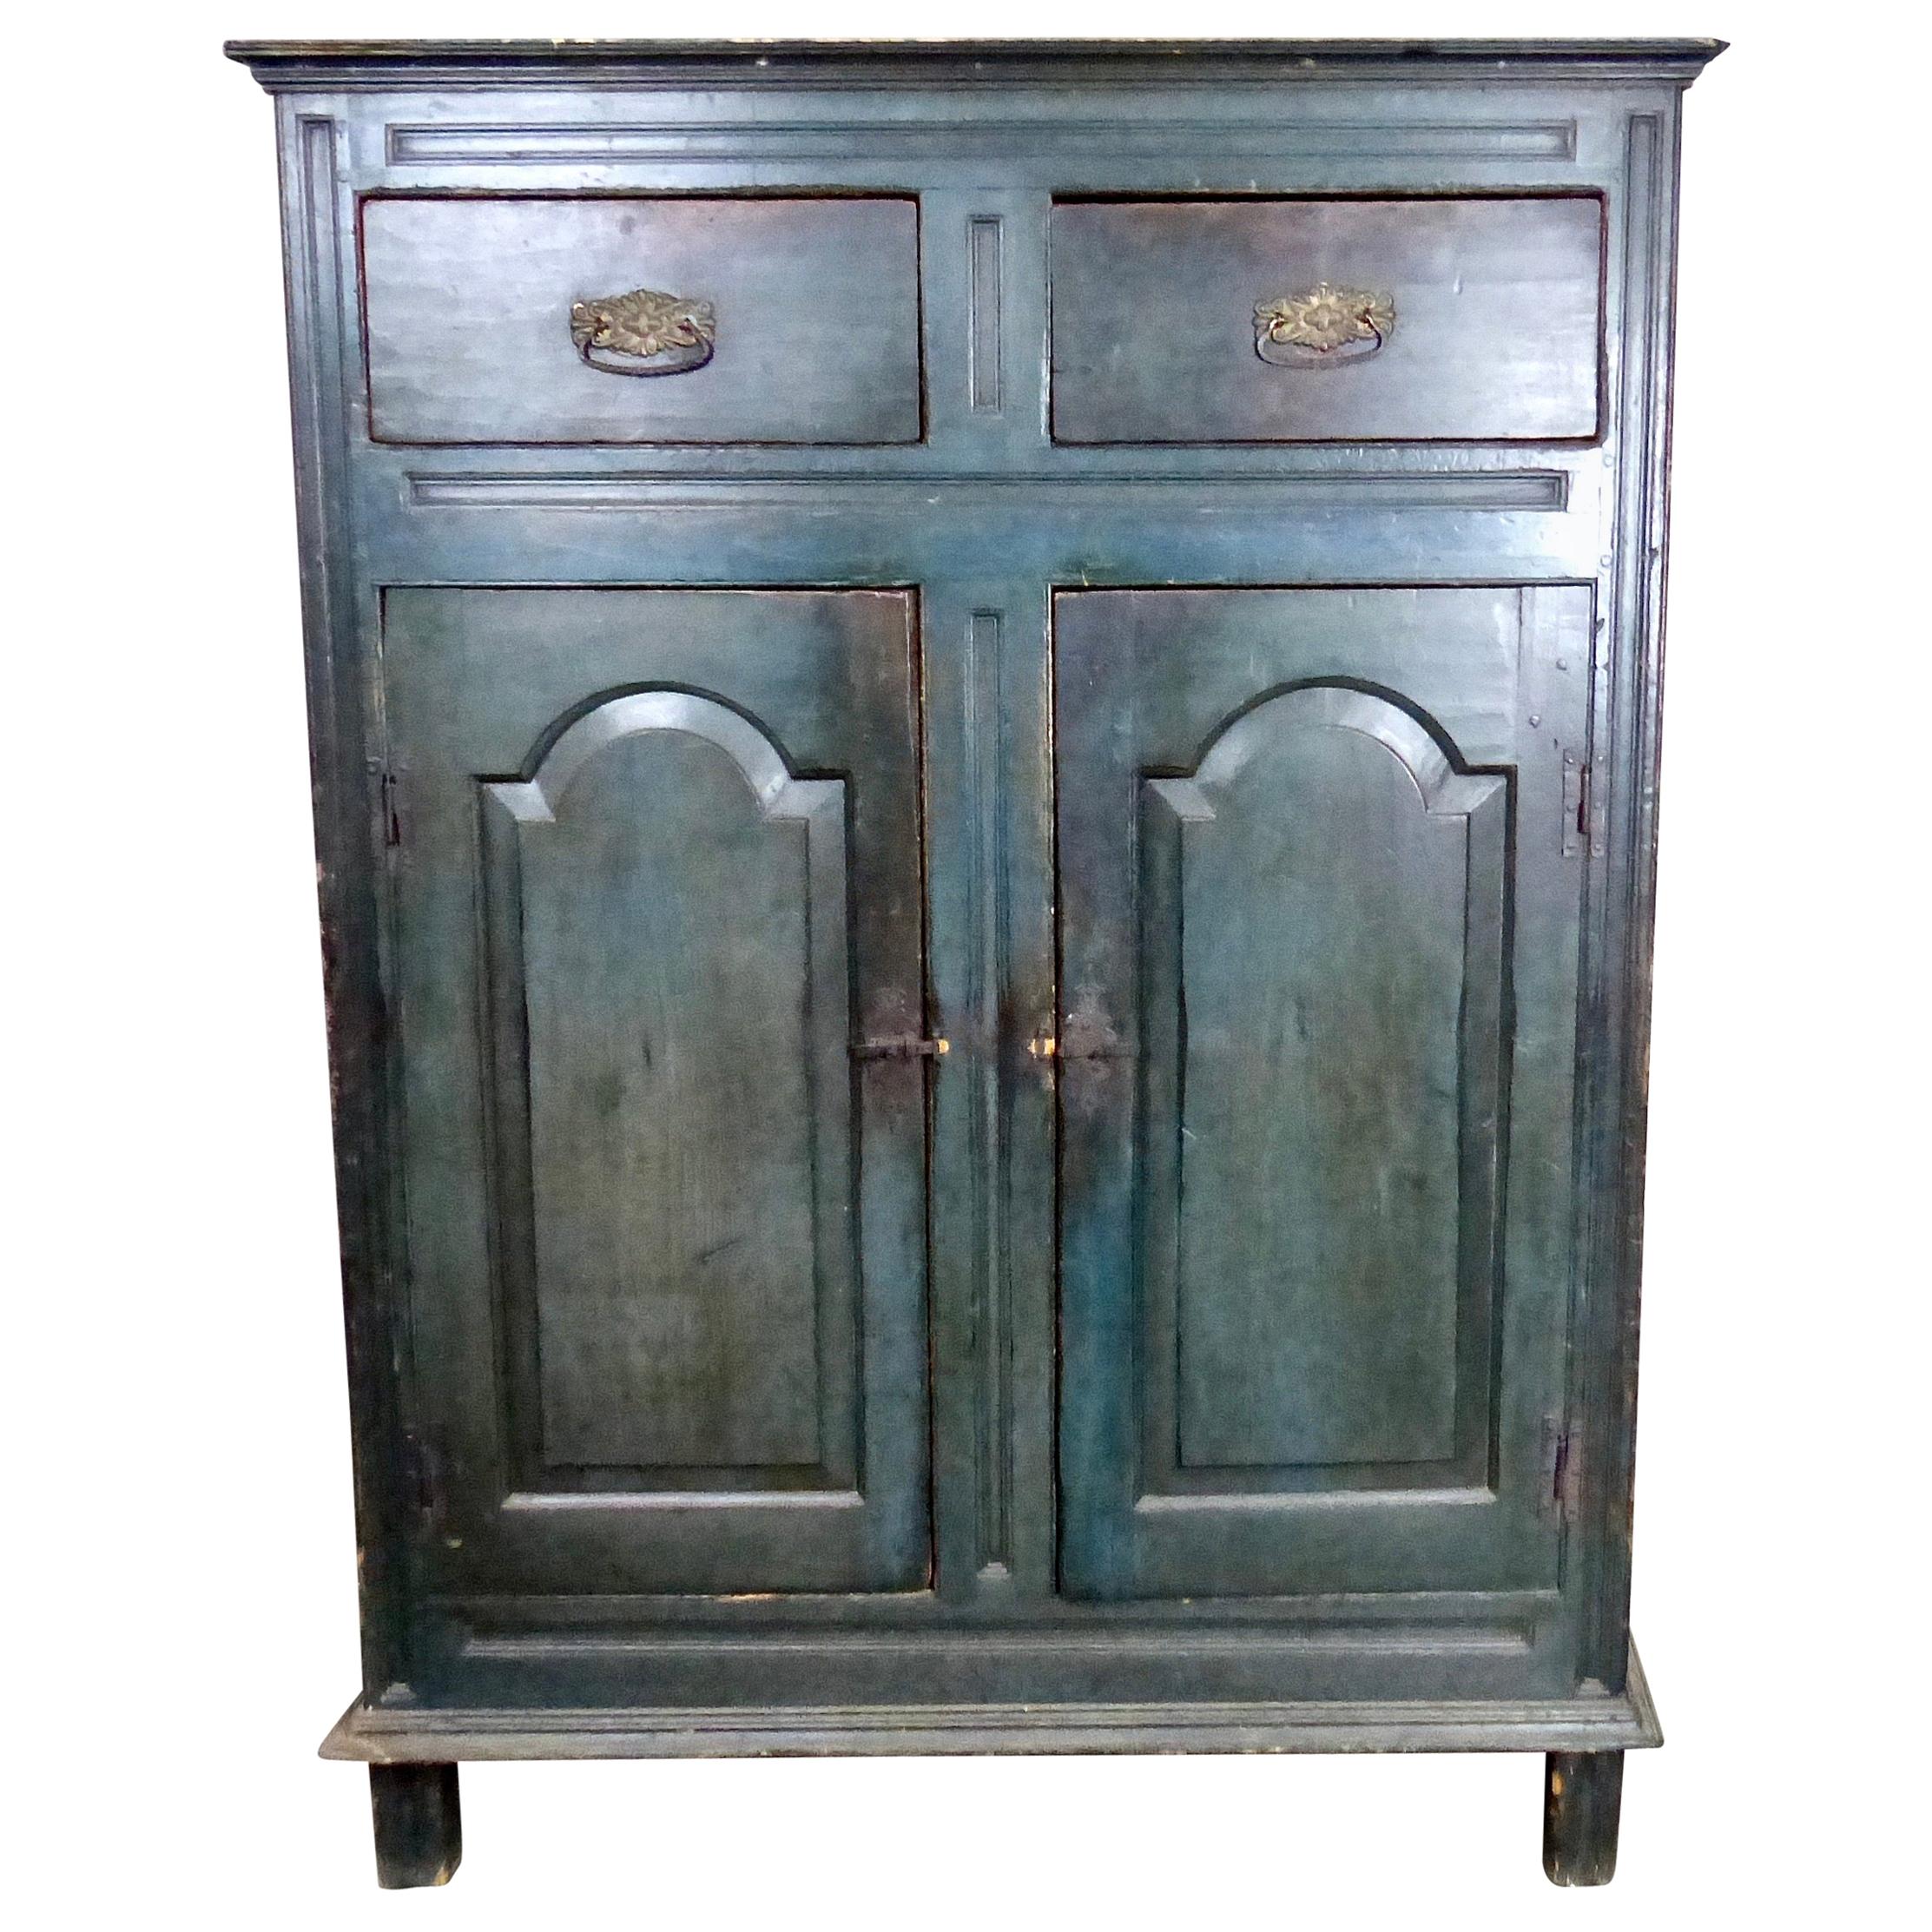 Handcrafted Quebec Painted Pine Cupboard, circa 1800-1810